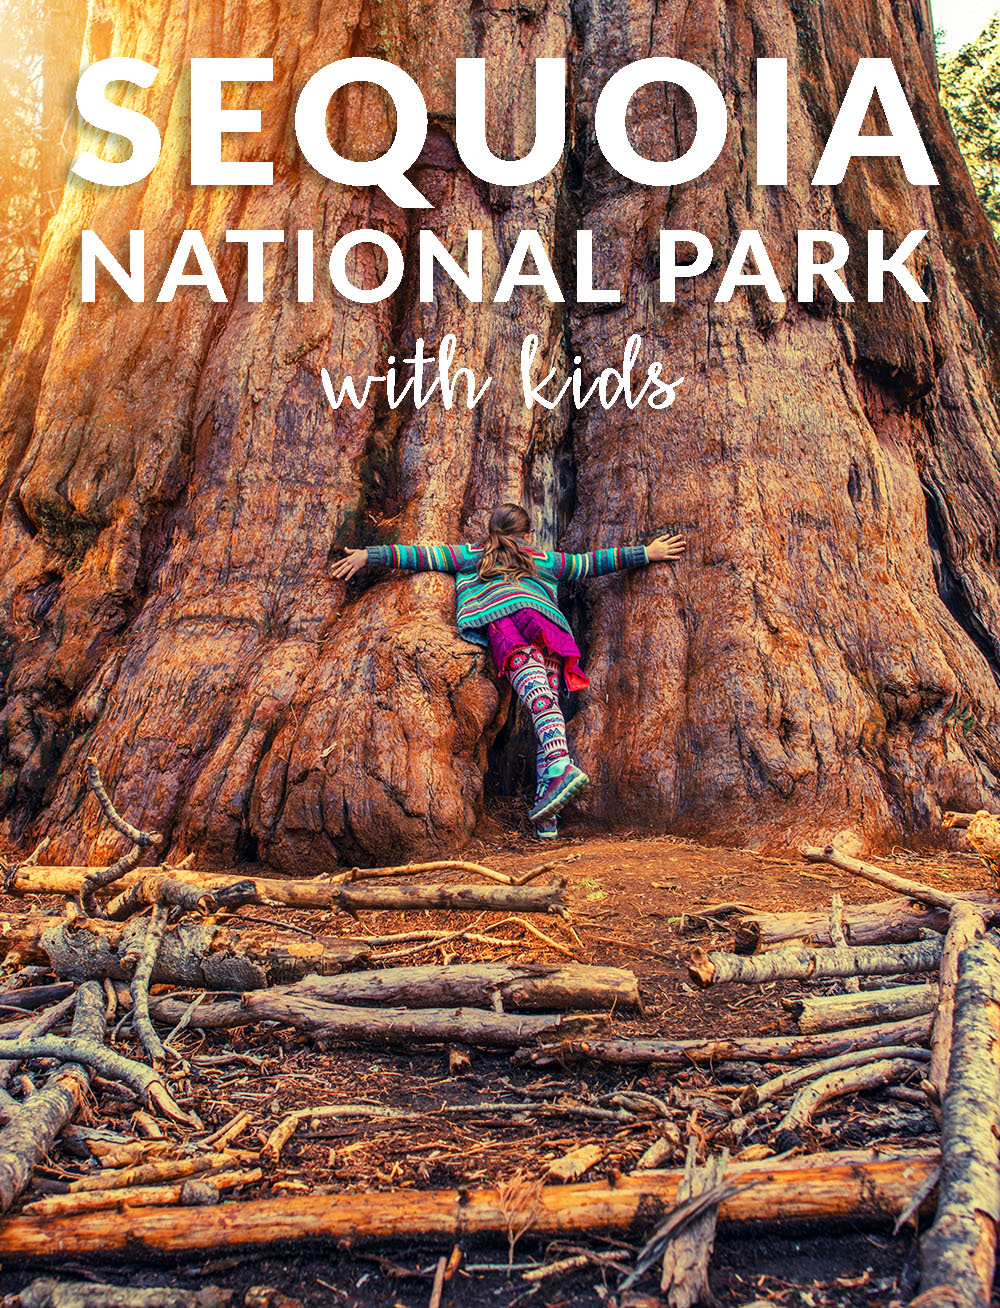 Sequoia national park with kids